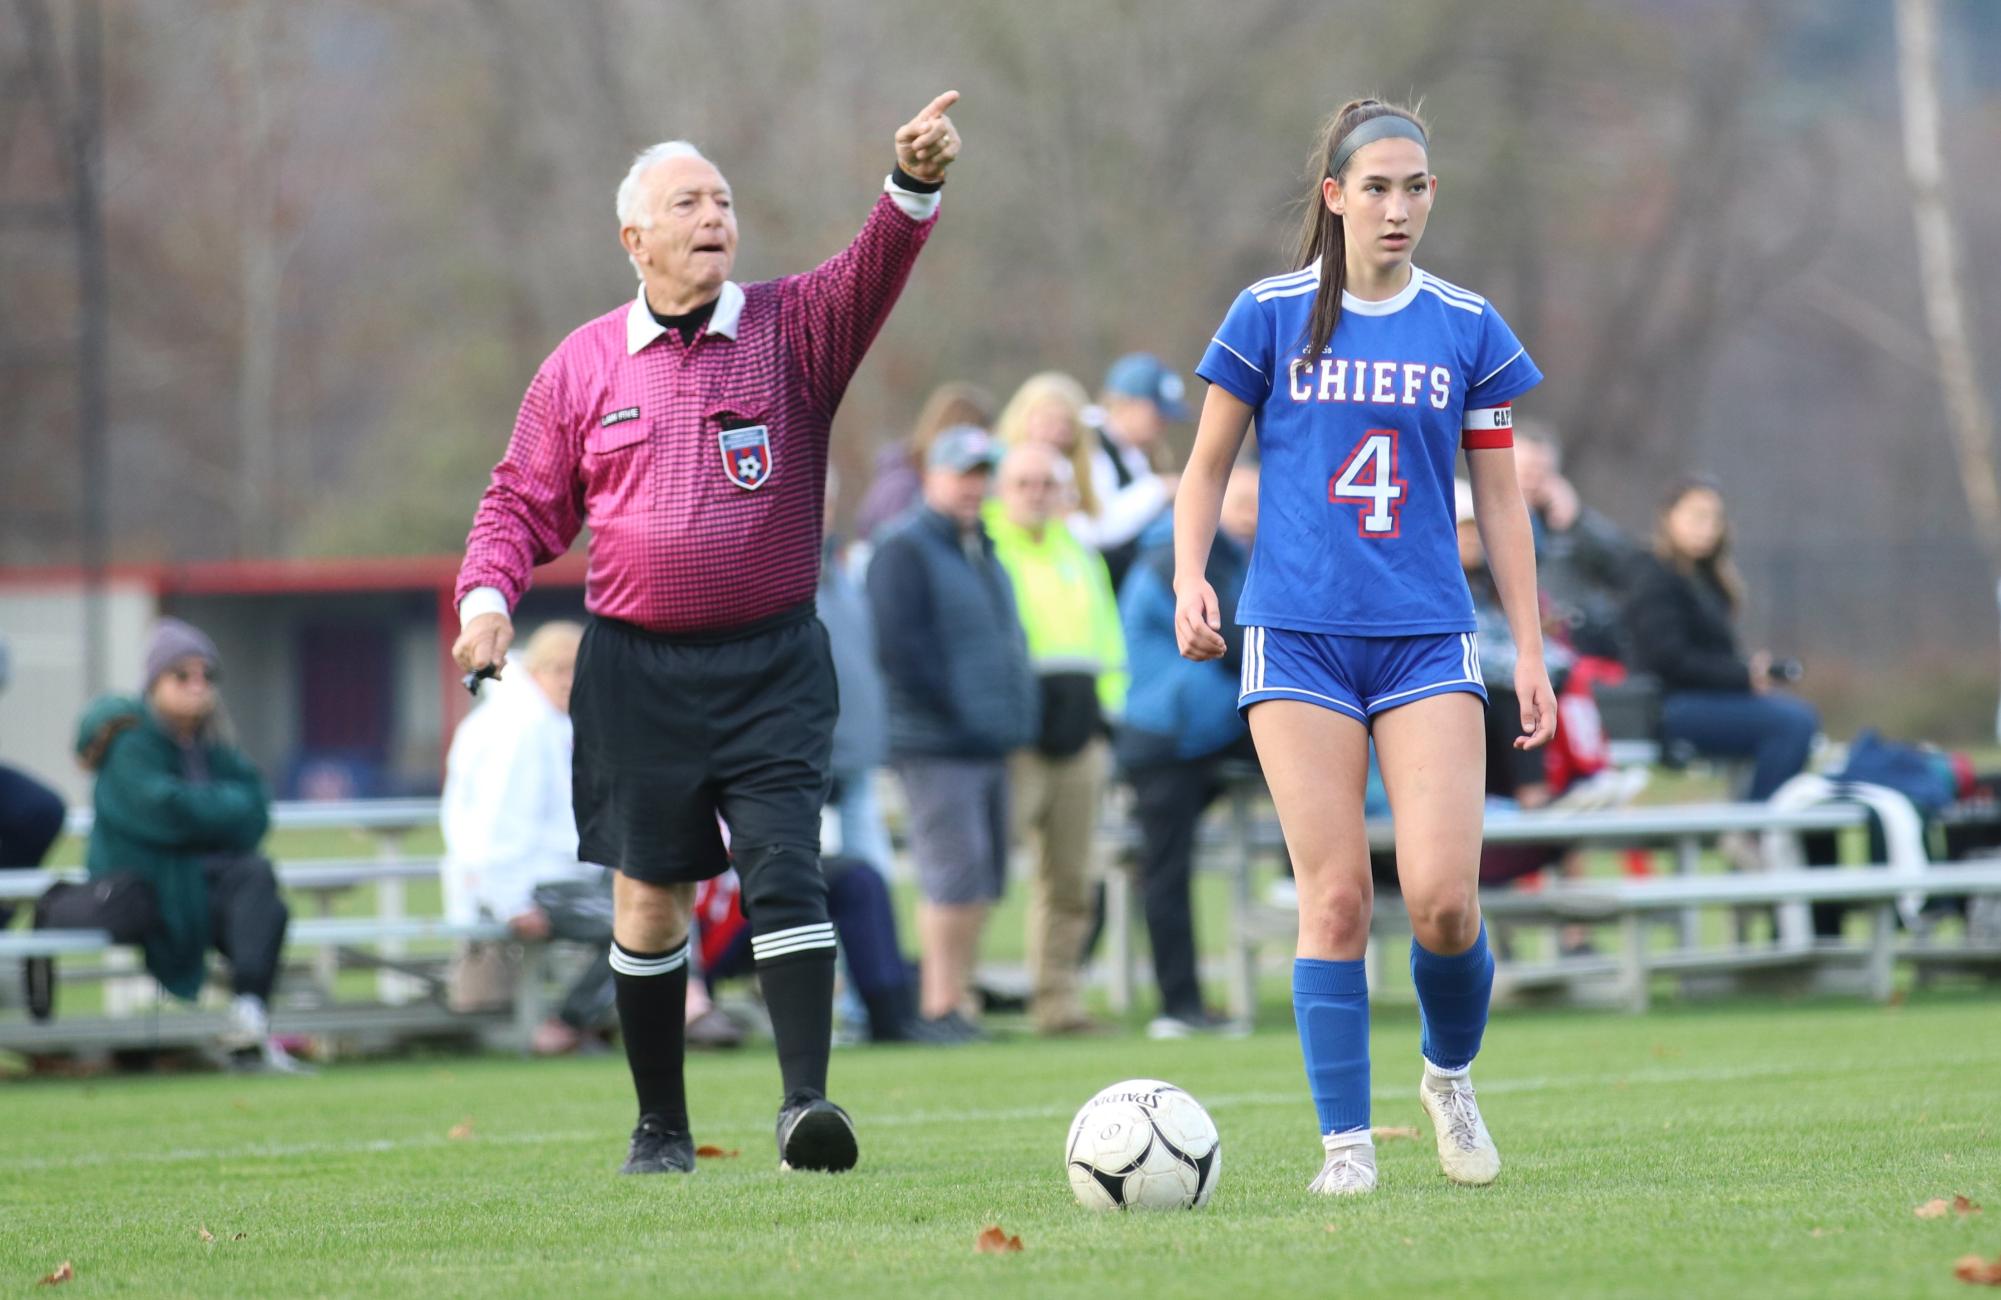 A referee signals after making a call during Nonnewaugs Class M girls soccer state tournament first-round game against New Fairfield on Nov. 6 as Layla Coppola prepares to put the ball back in play. Coppola is one of many student-athletes who express frustration about officiating.